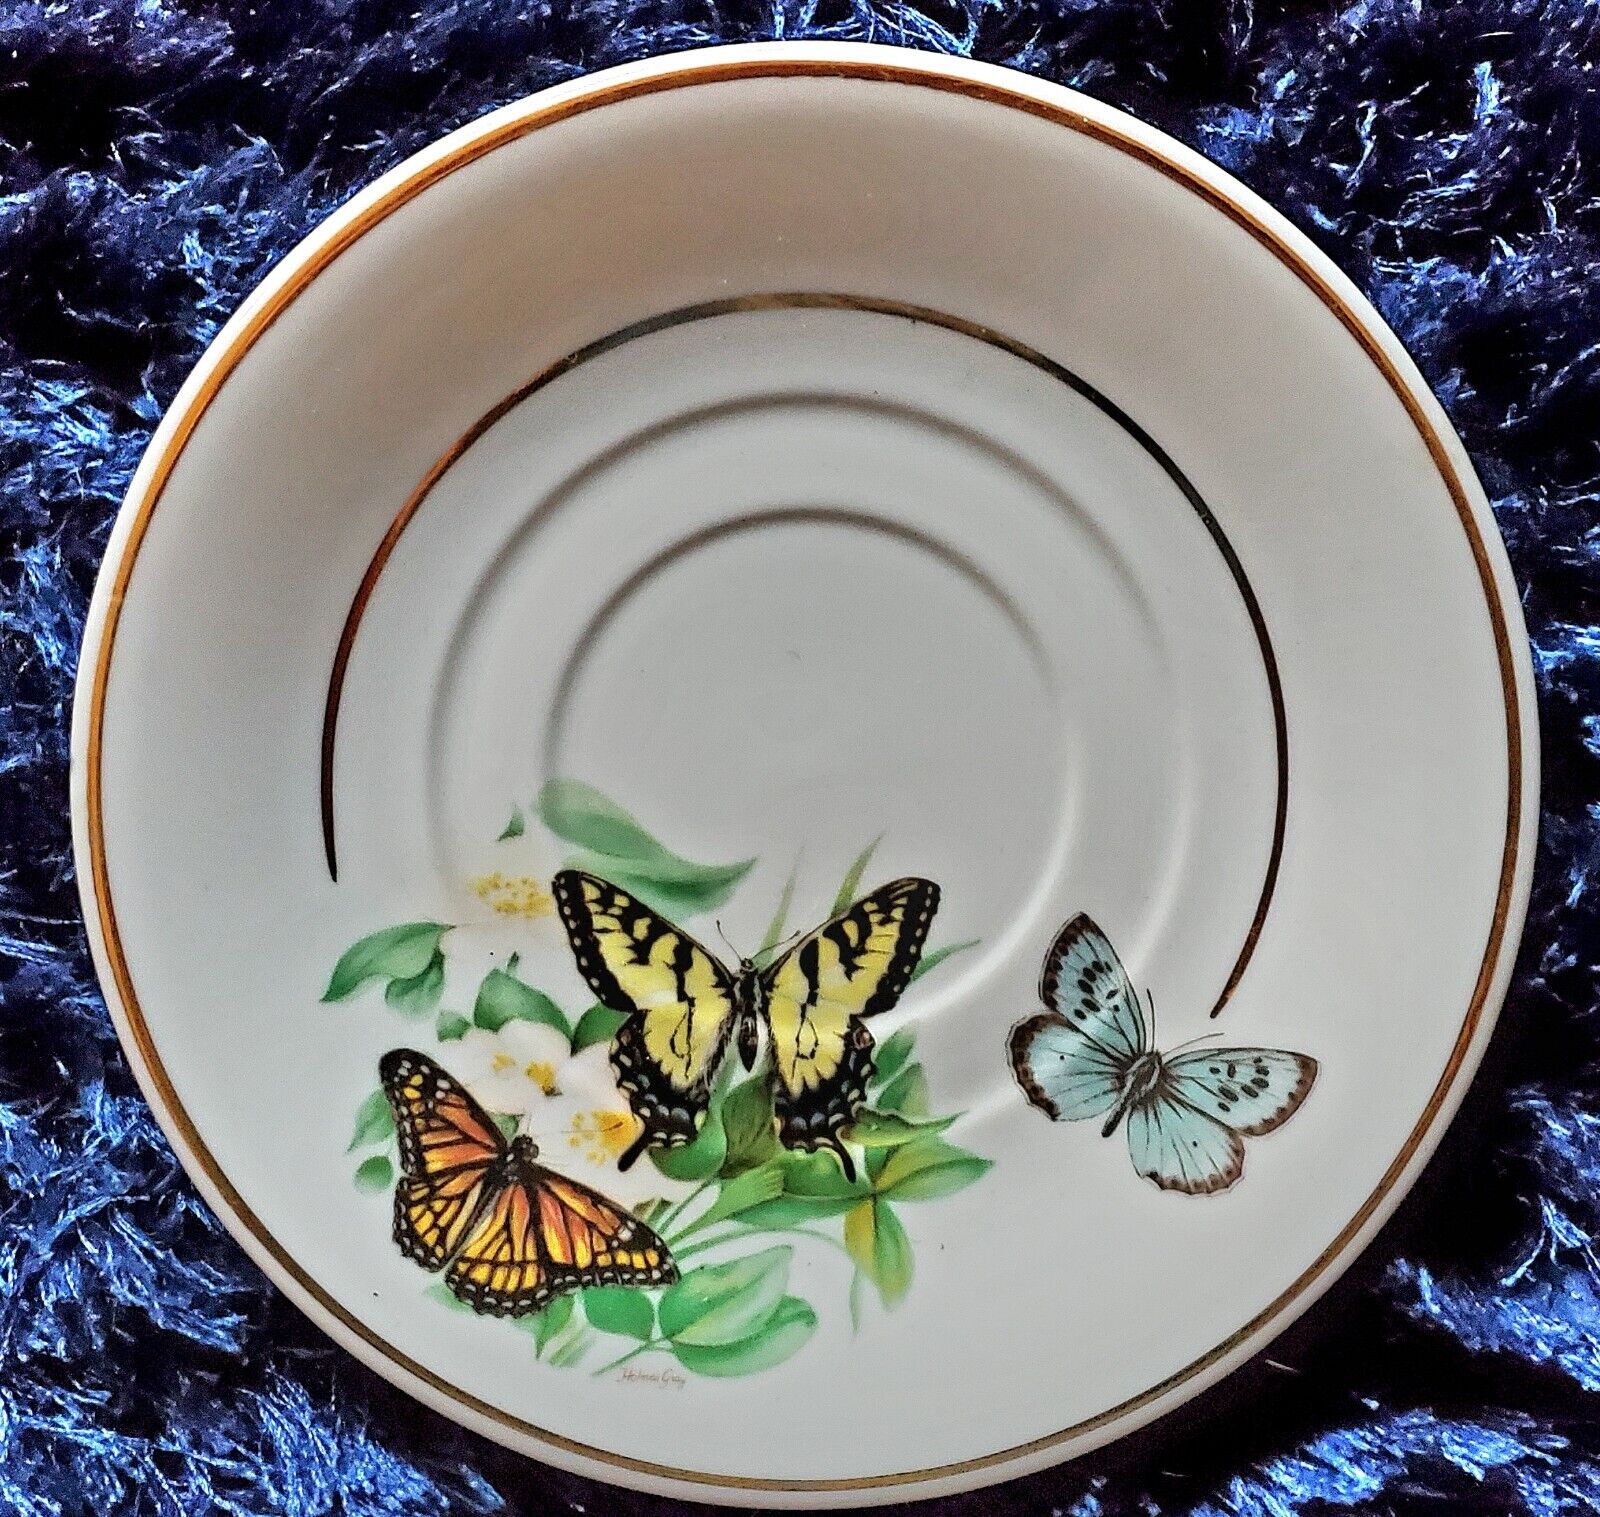 Vintage Porcelain Colorful Decorative Butterfly Plate Saucer Wall Hanging Art 